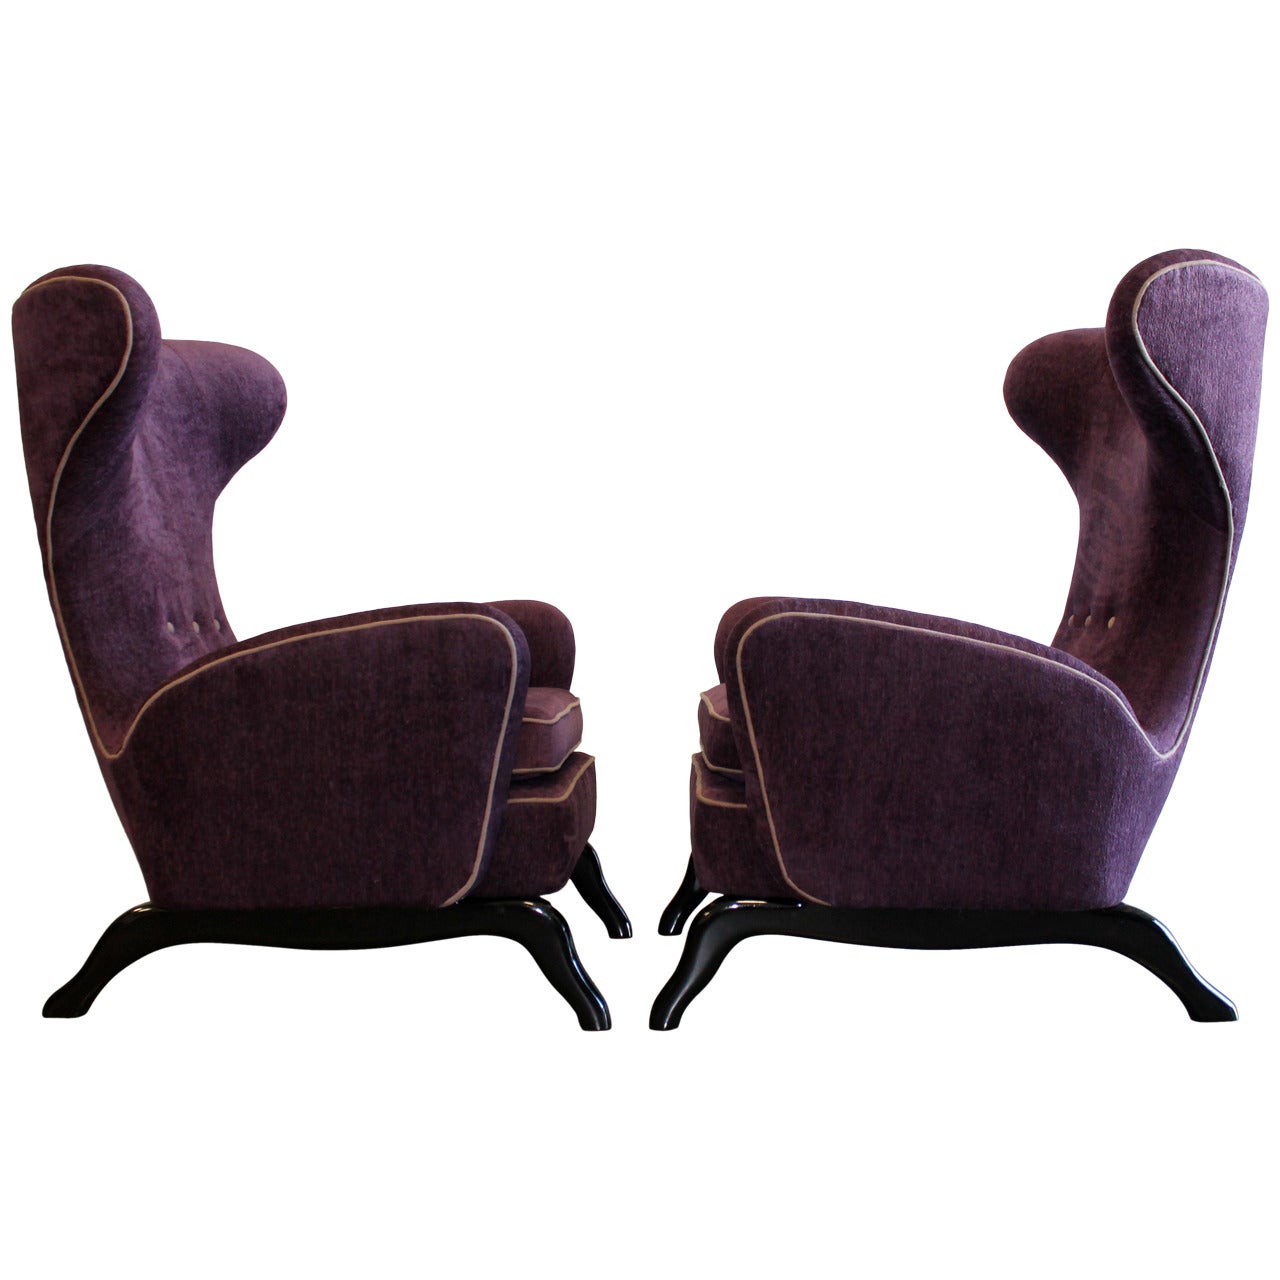 Pair of 1950s Italian Sculptural Wingback Chairs